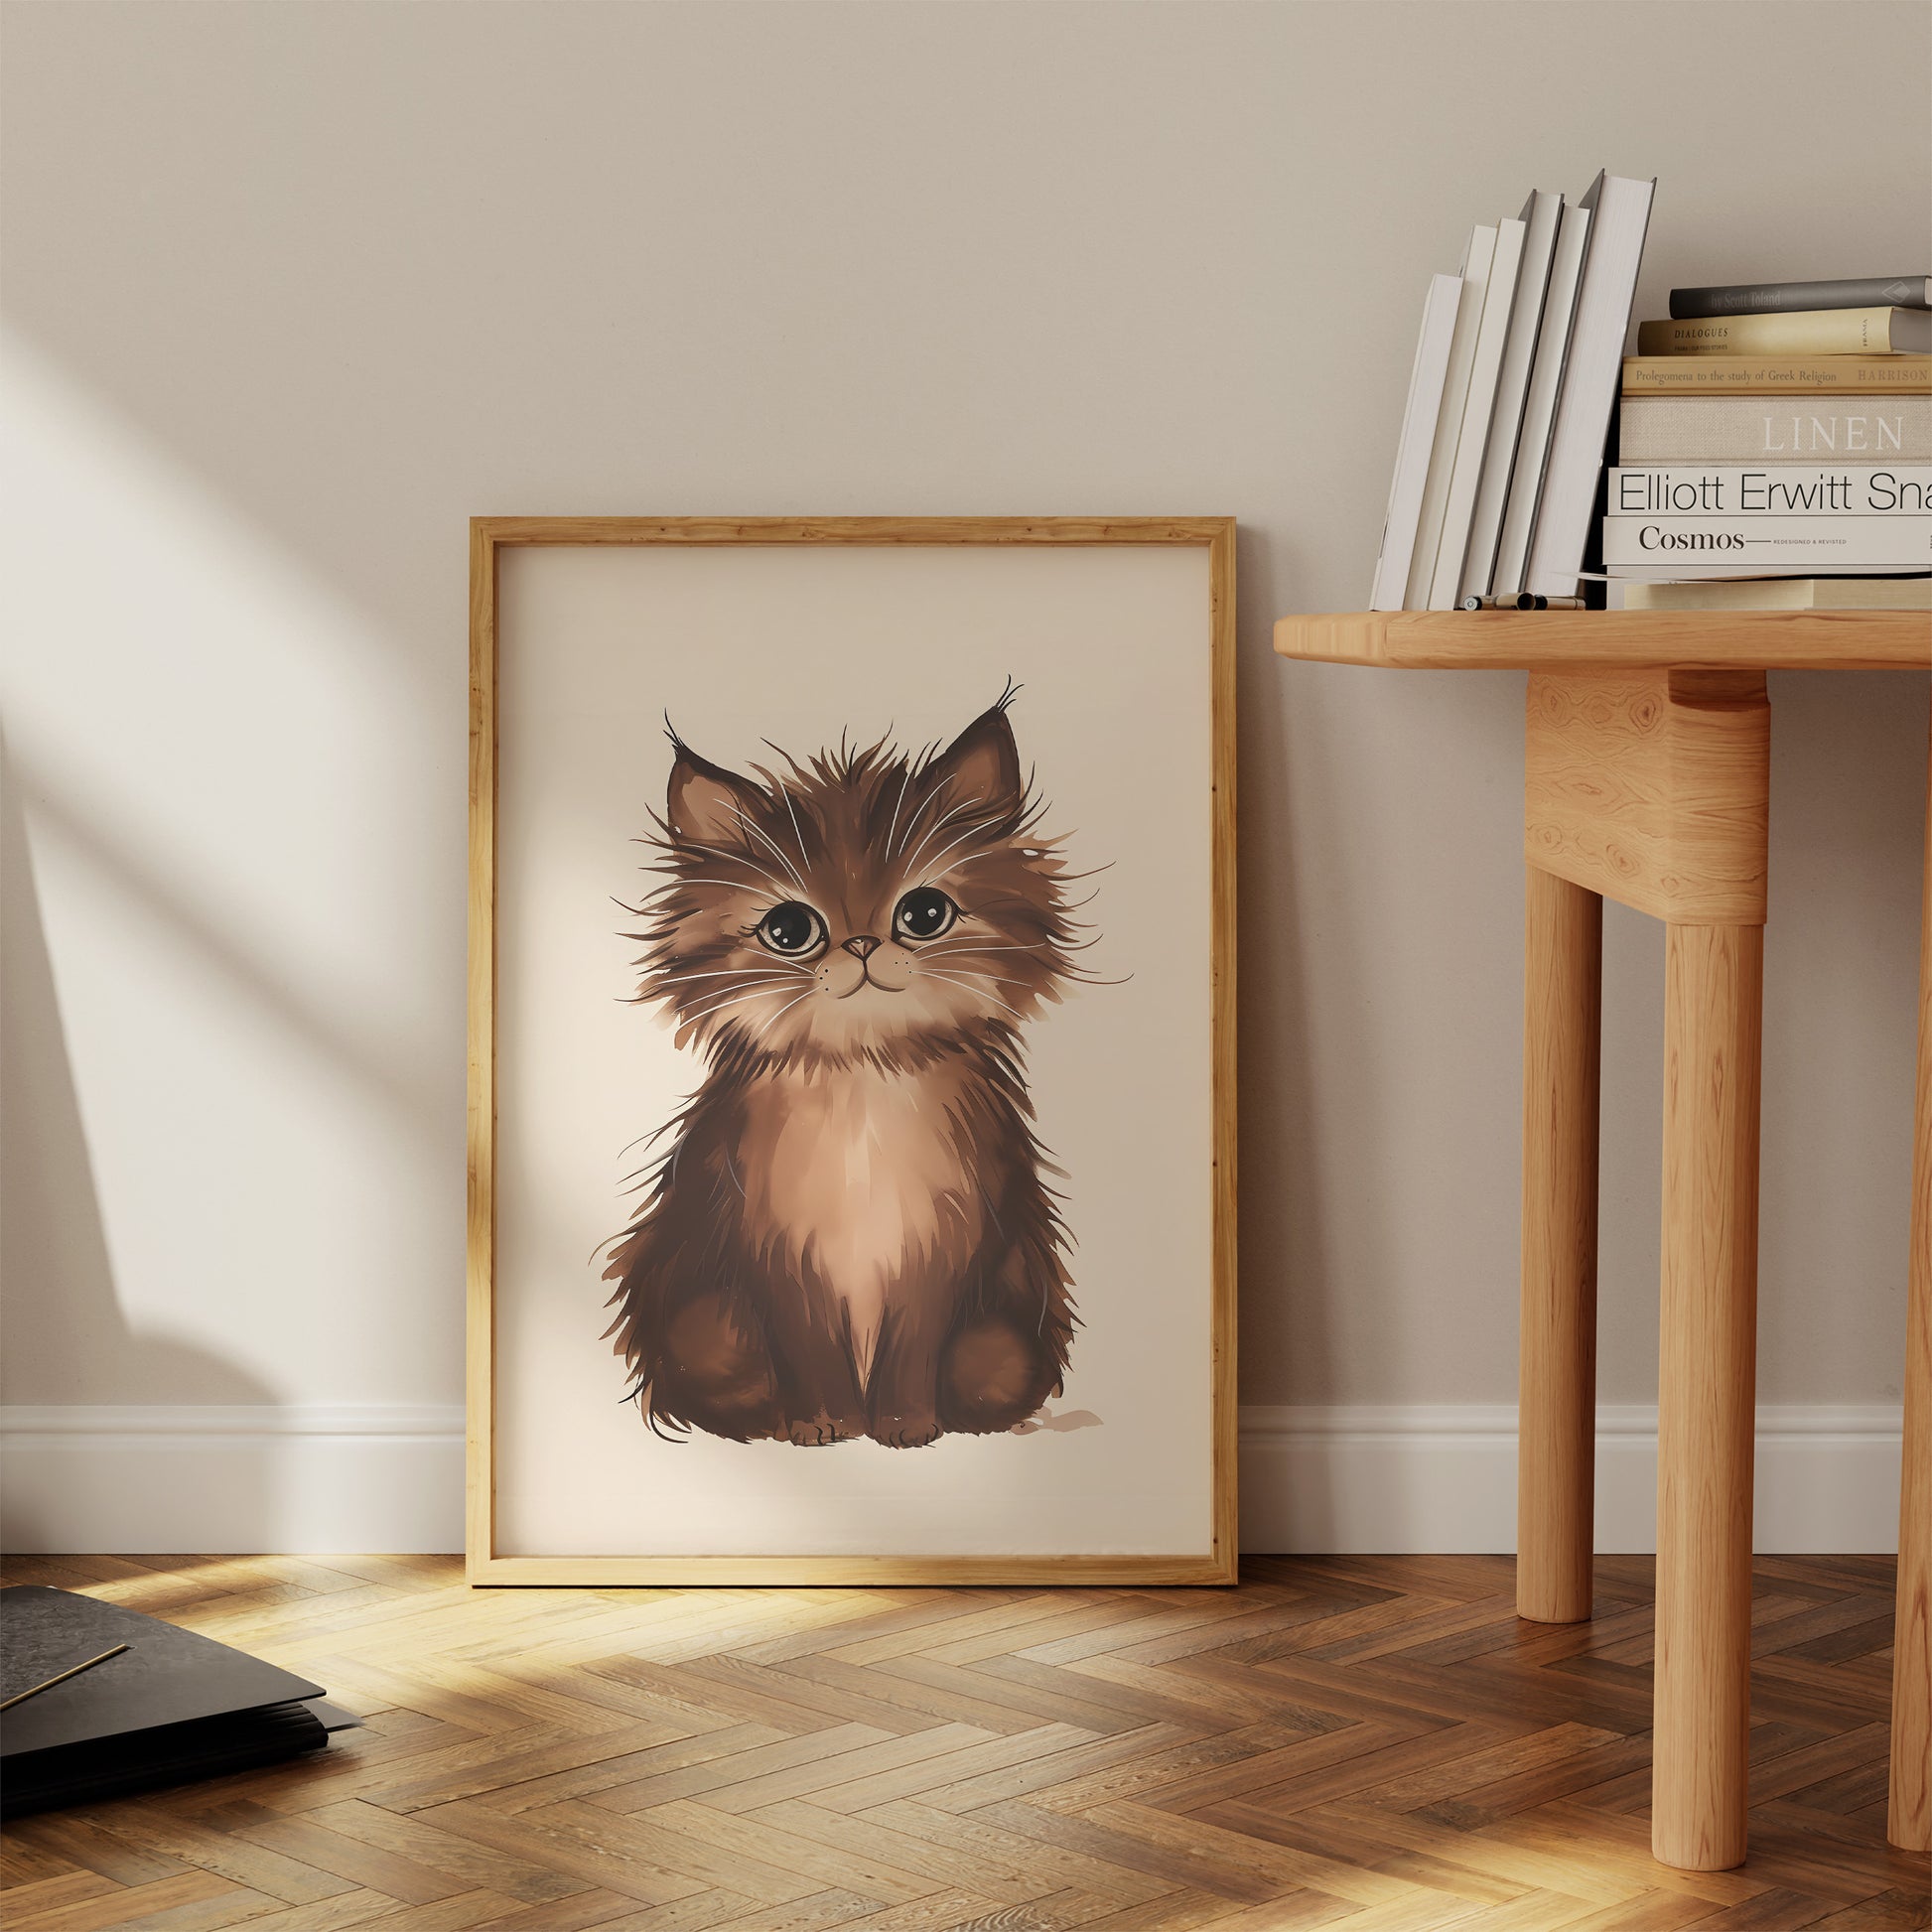 Illustration of a fluffy brown cat in a frame leaning against a wall.